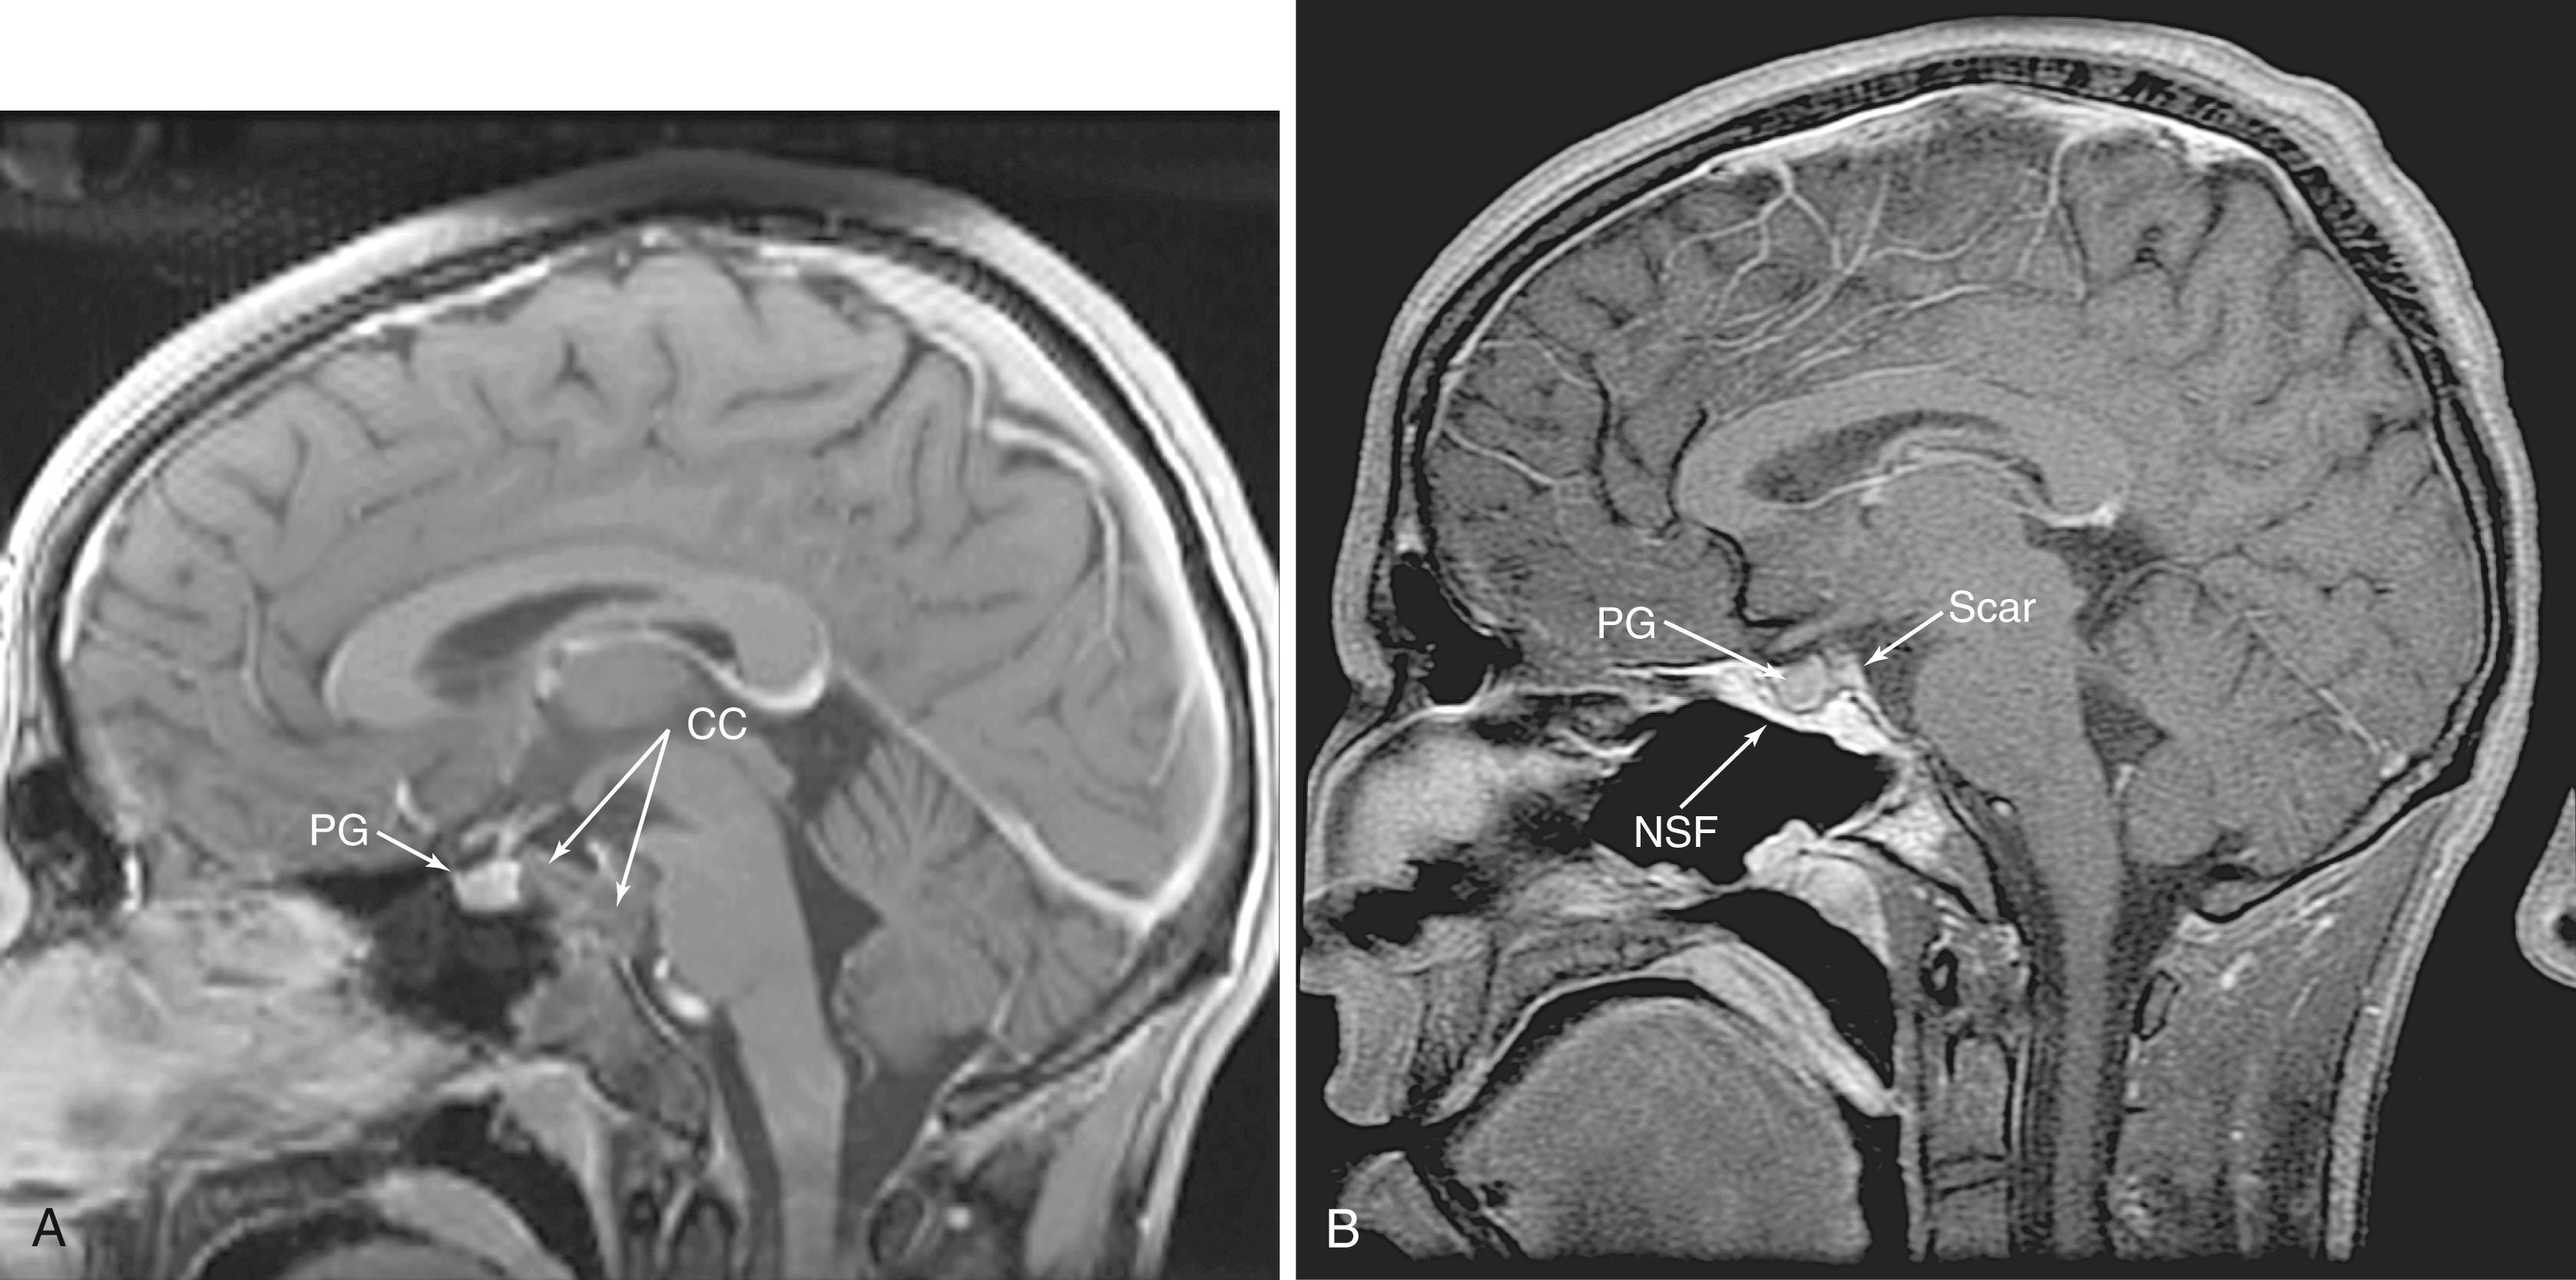 Fig. 50.9, (A) A sagittal postcontrast magnetic resonance image (MRI) showing a superior clival chordoma (CC) with extension behind the pituitary gland (PG) into the dorsum sellae. (B) A postoperative MRI following the expanded endonasal approach to the lesion in (A) showing the complete resection of the superior clival lesion, which involved a pituitary transposition, as evidenced by the scar tissue posterior to the gland (PG). There is a brightly enhancing nasoseptal flap (NSF) in place for reconstruction.